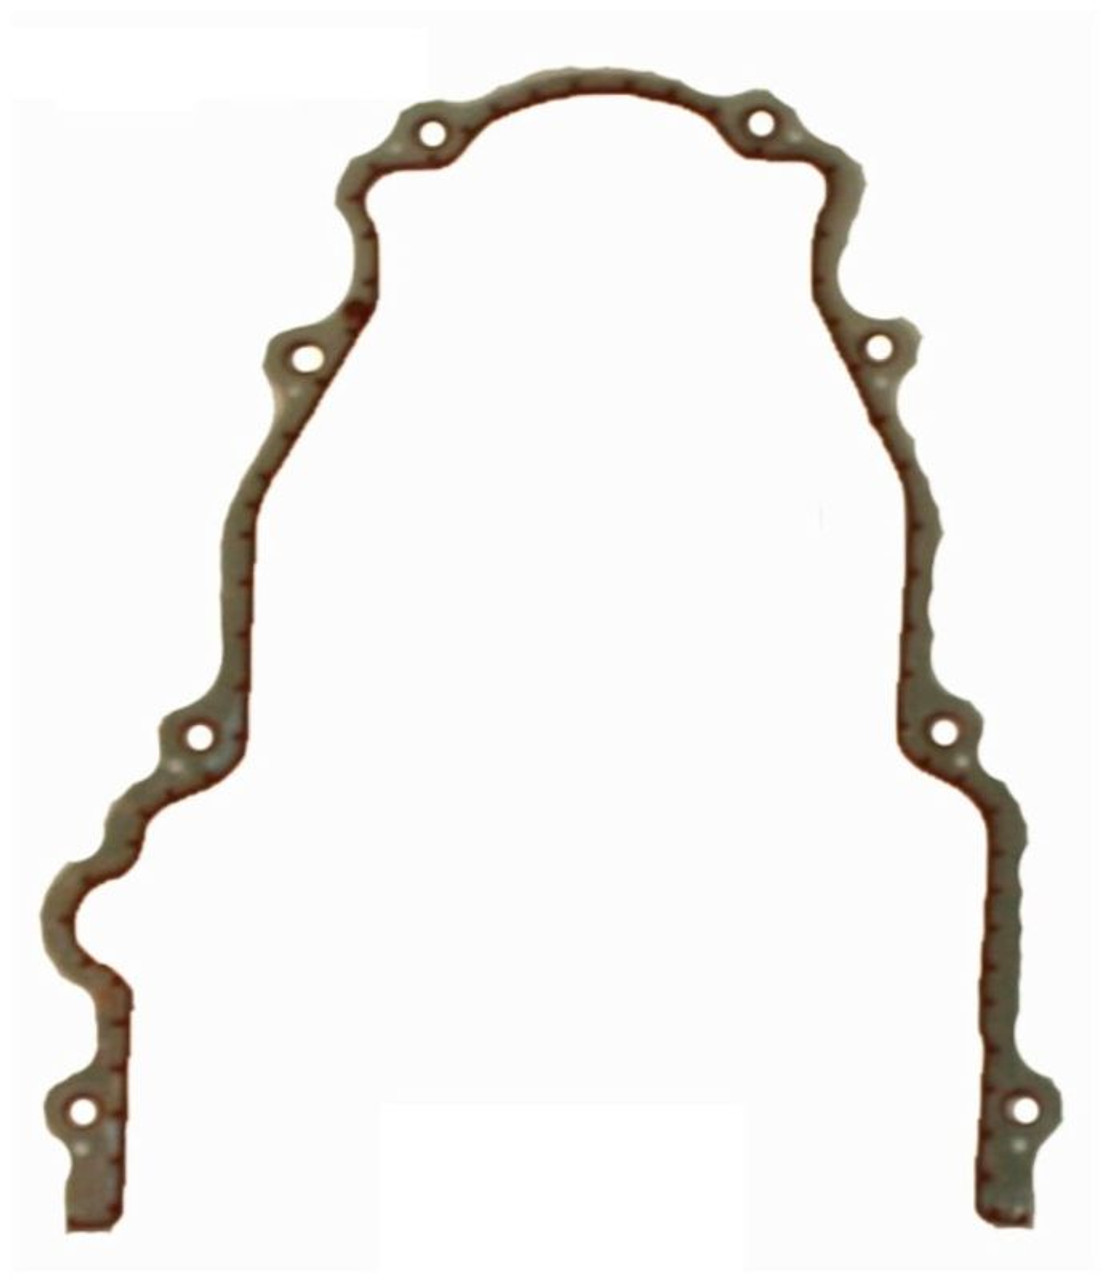 2010 Chevrolet Express 3500 4.8L Engine Timing Cover Gasket TCG293-A -644